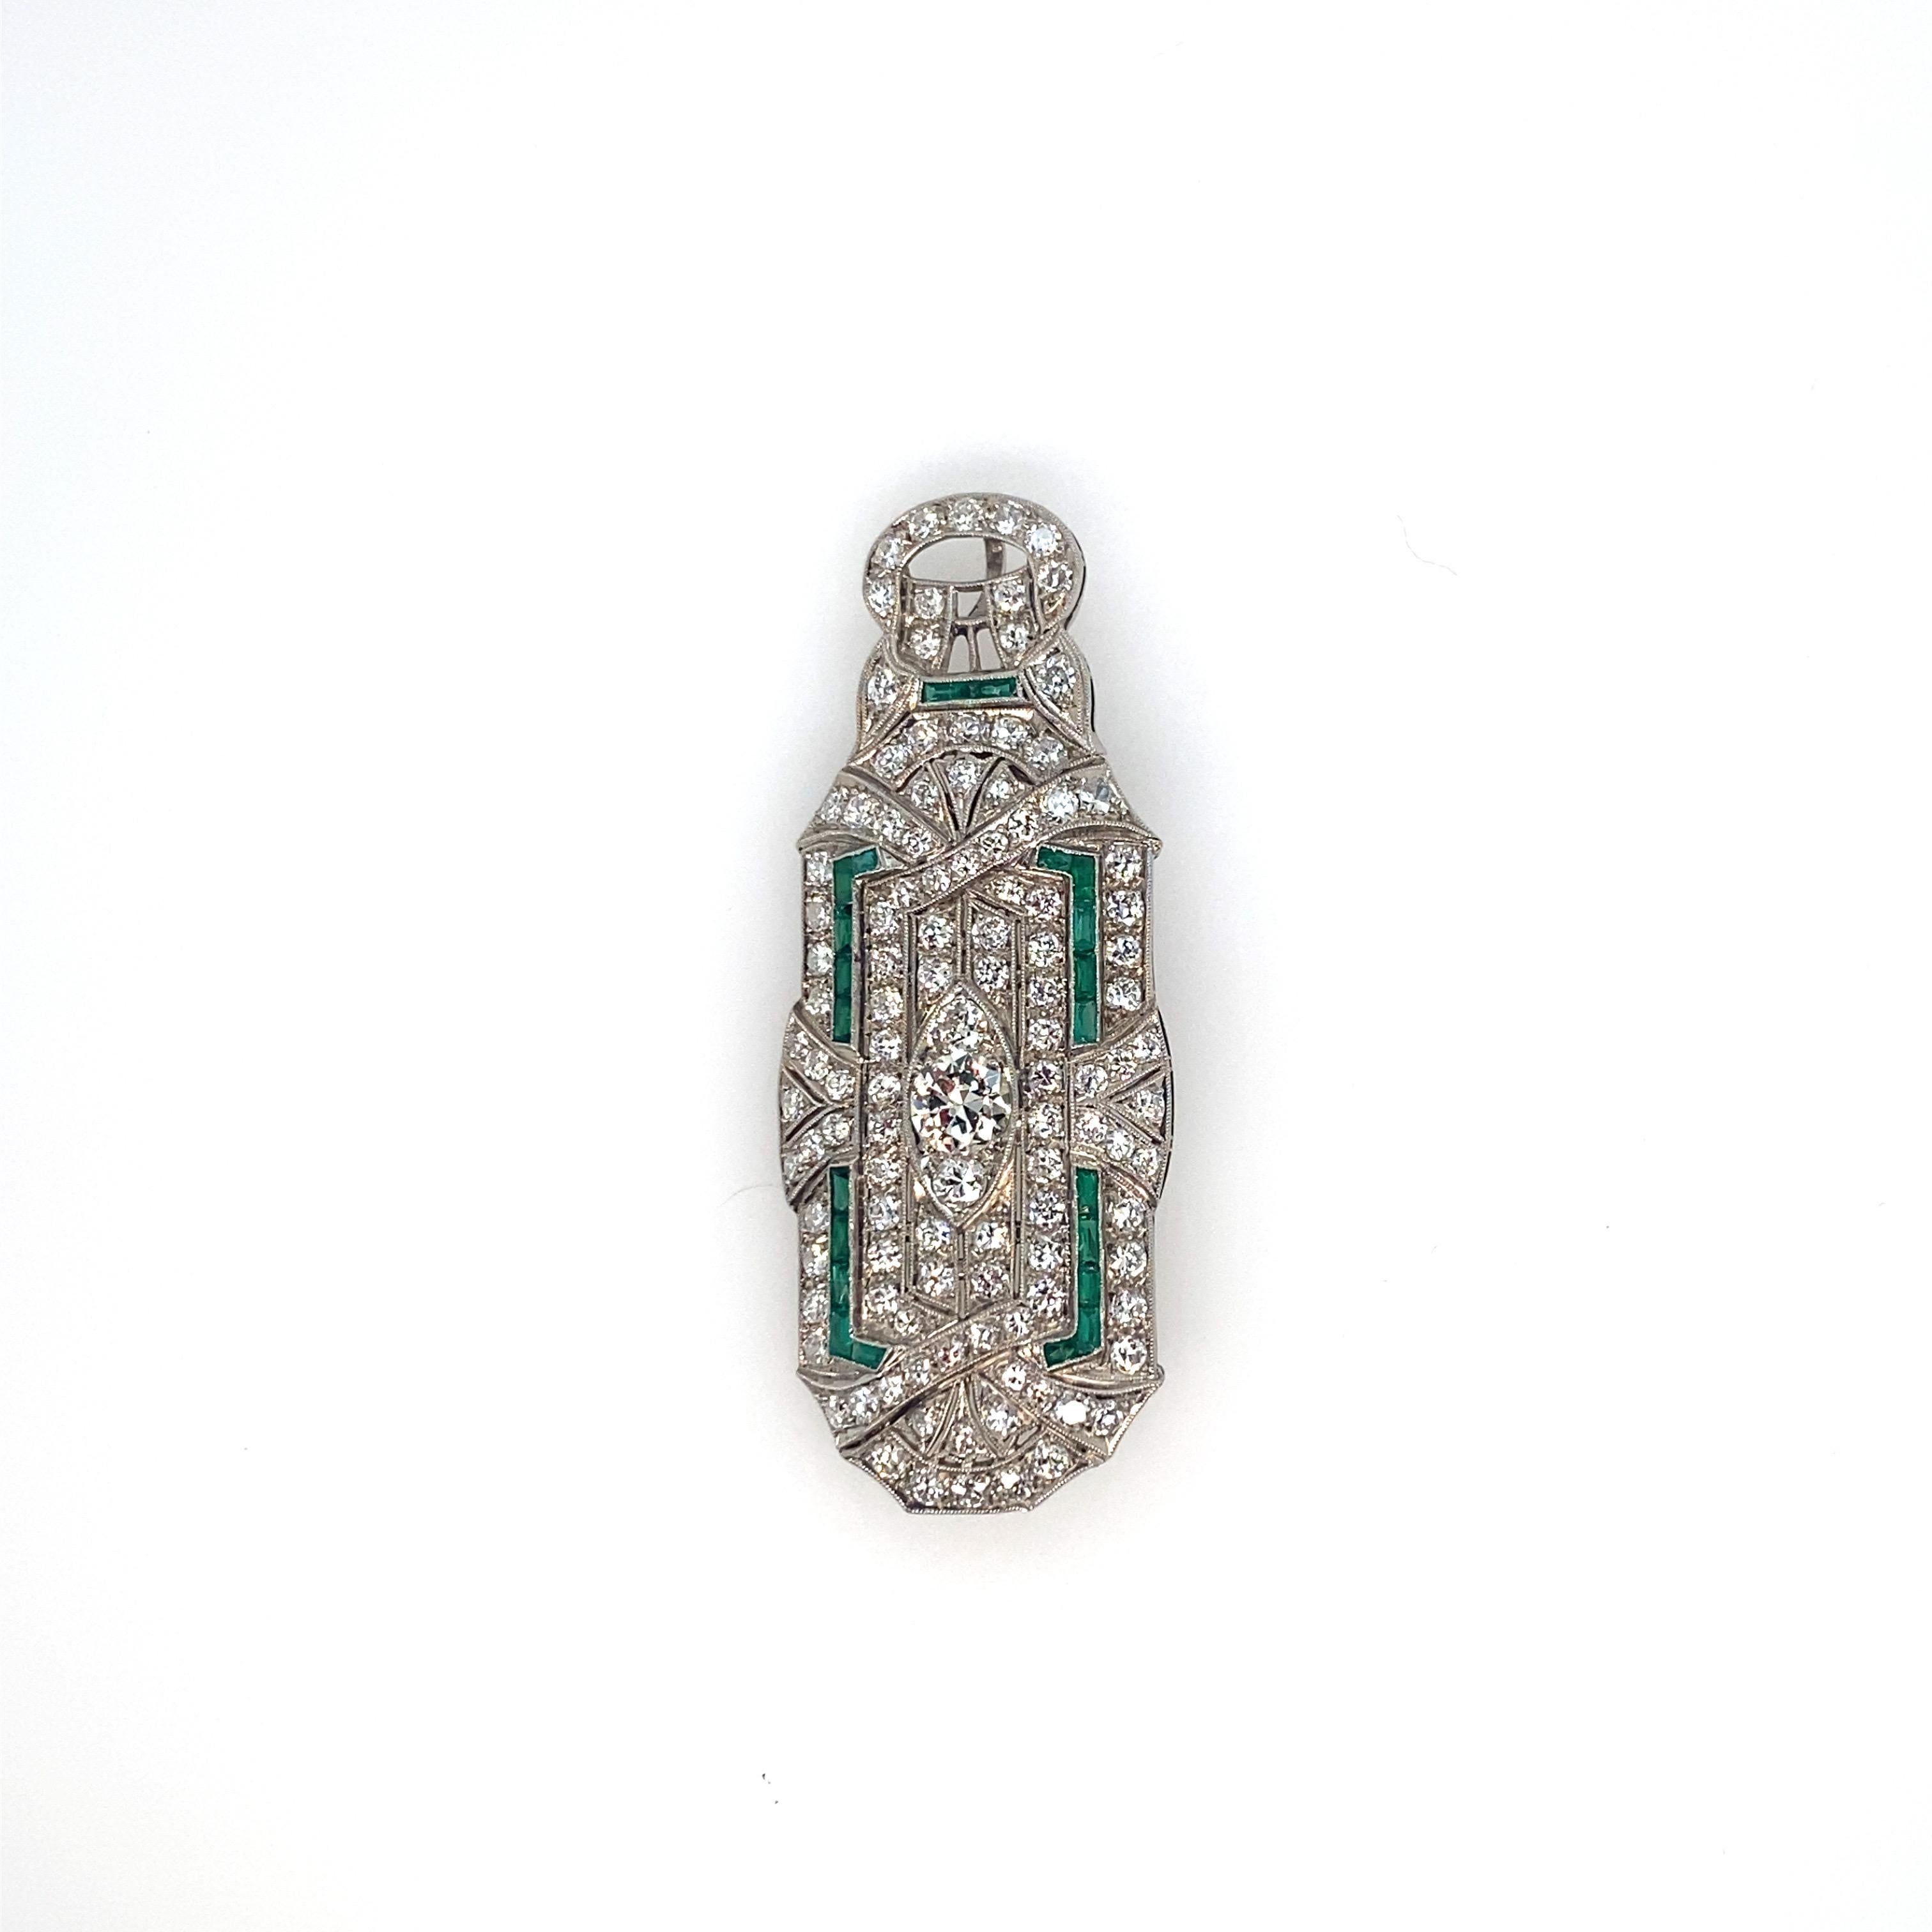 LAST PRICE REDUCTION! Get this gorgeous piece before its GONE! This beautiful one-of-a-kind pendant/ brooch was from the Estate of Alfred W. Miles.  Mr. Miles was a CPA in New York, and worked on the board of Tiffany's, was vice president of Bonwit